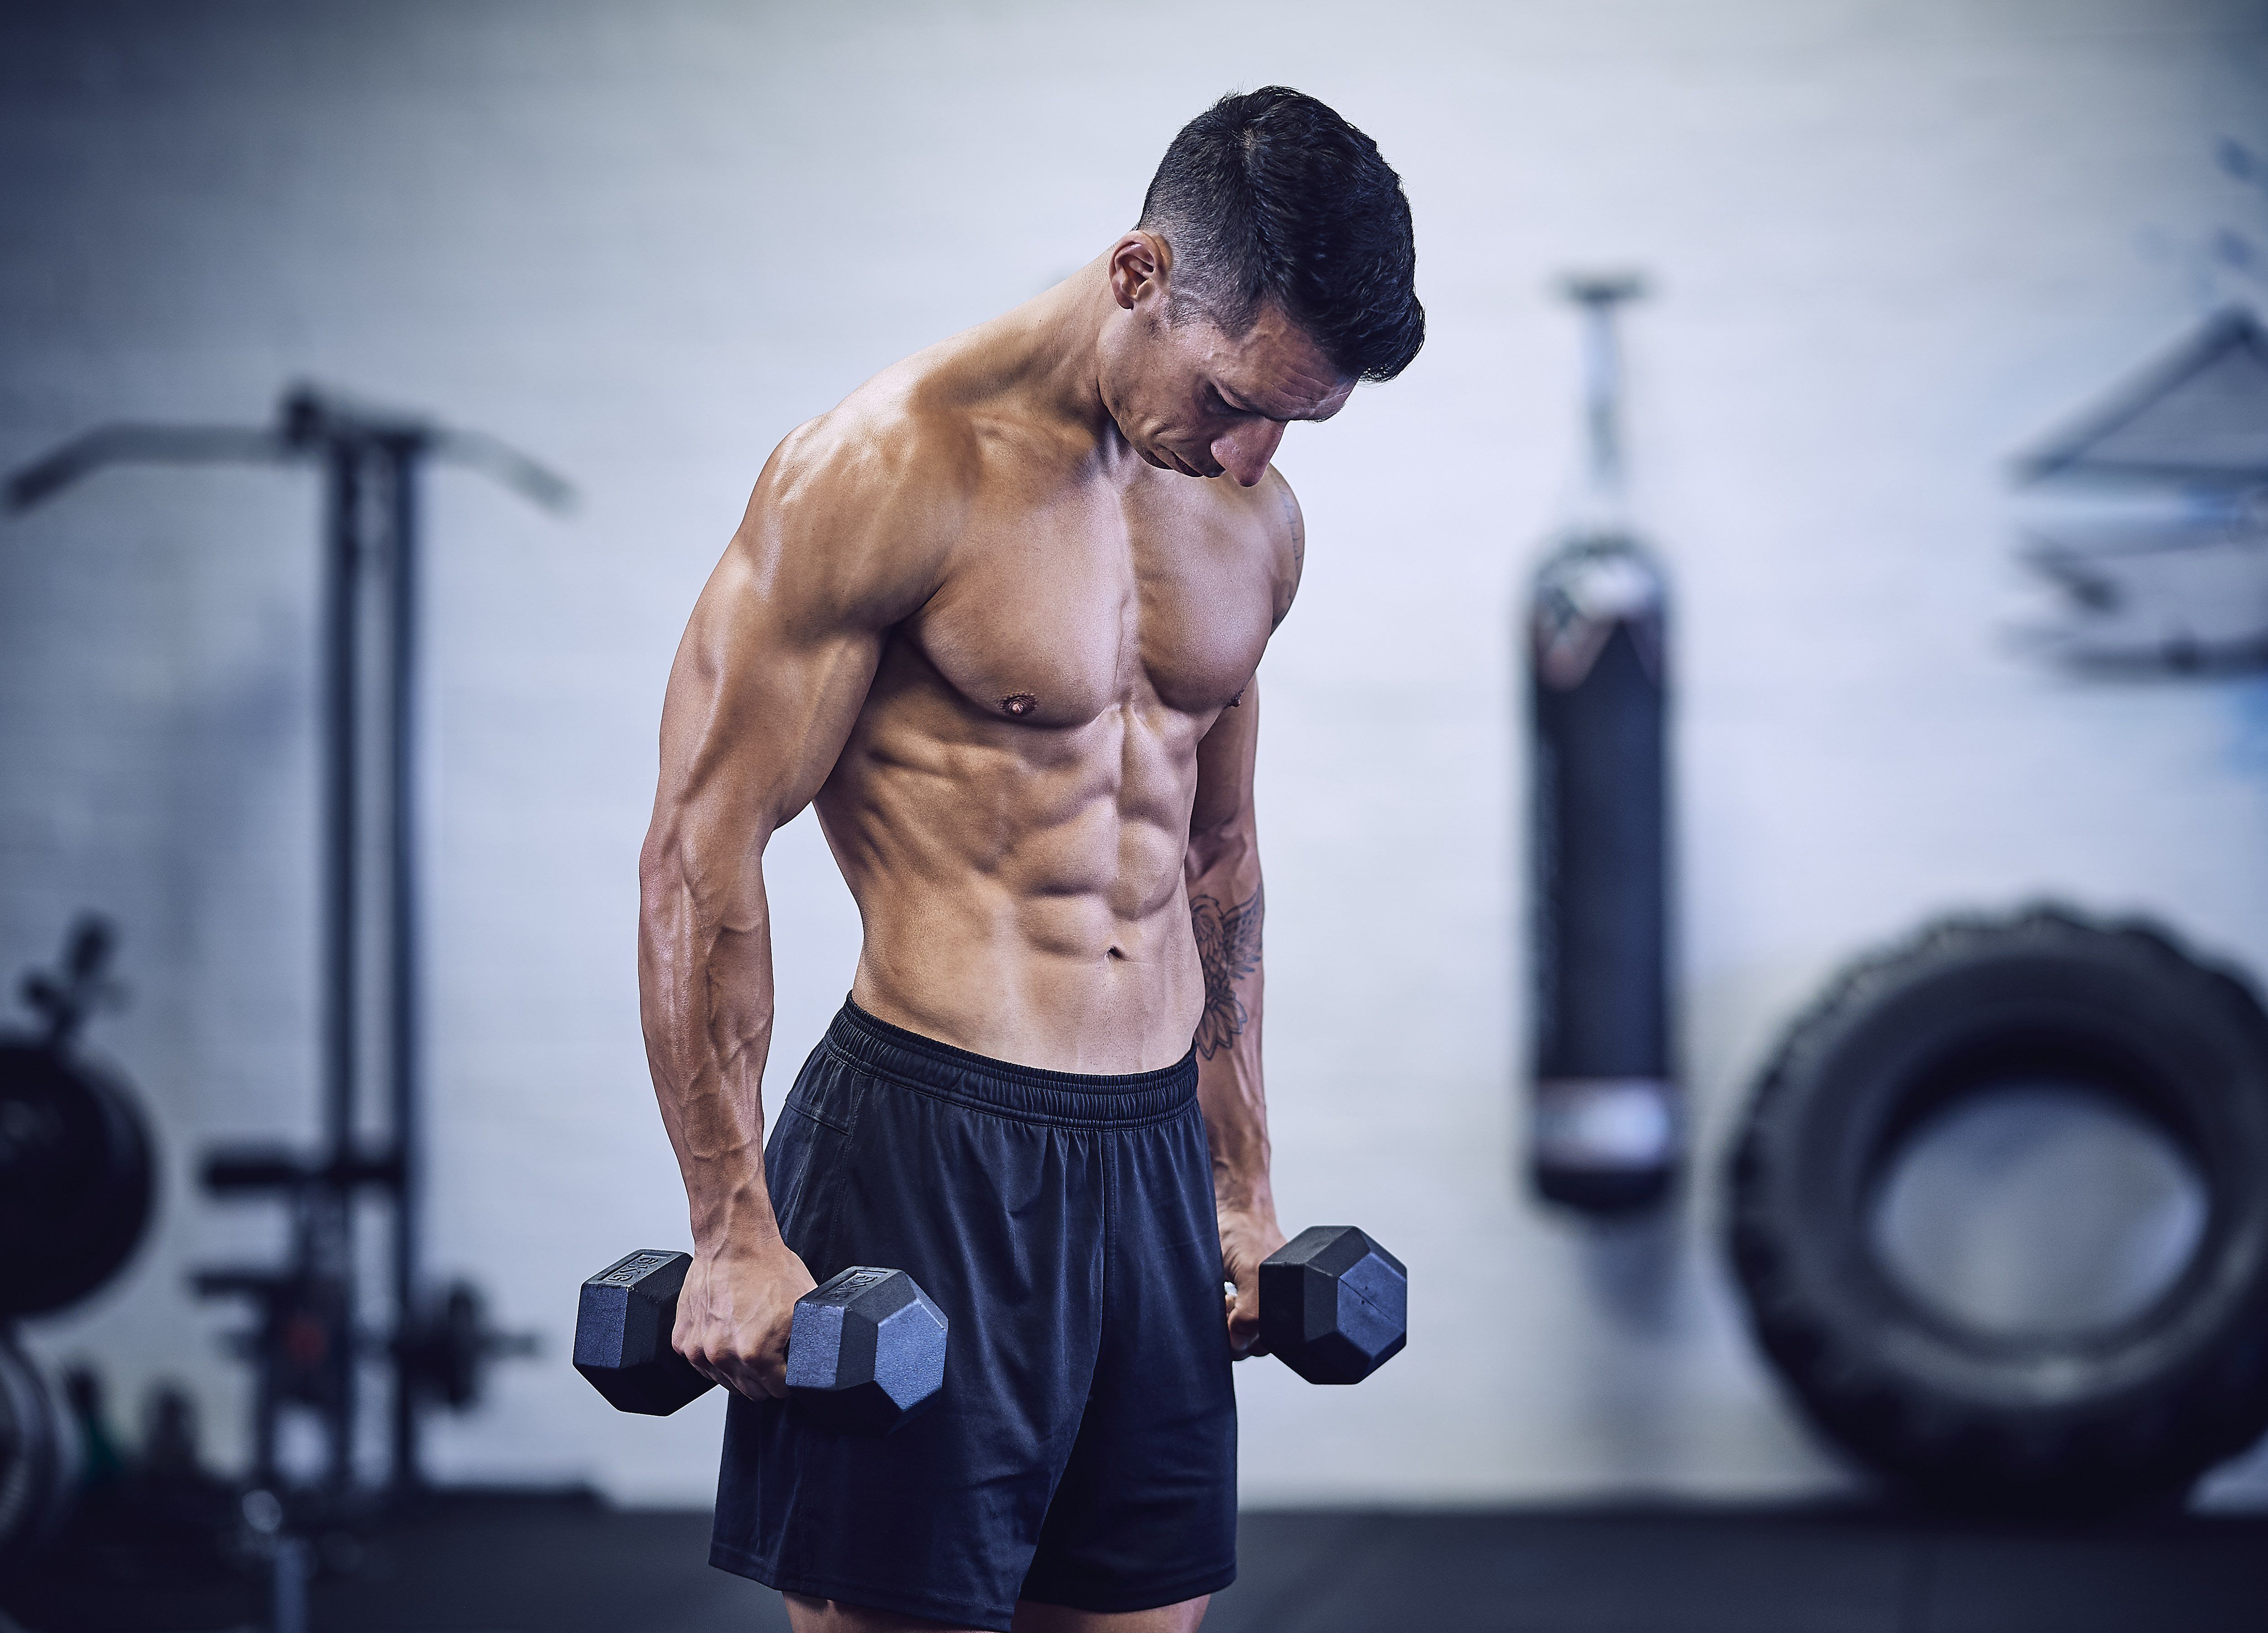 Bodybuilder posing at gym - back view full lenght portrait - Stock Image -  Everypixel